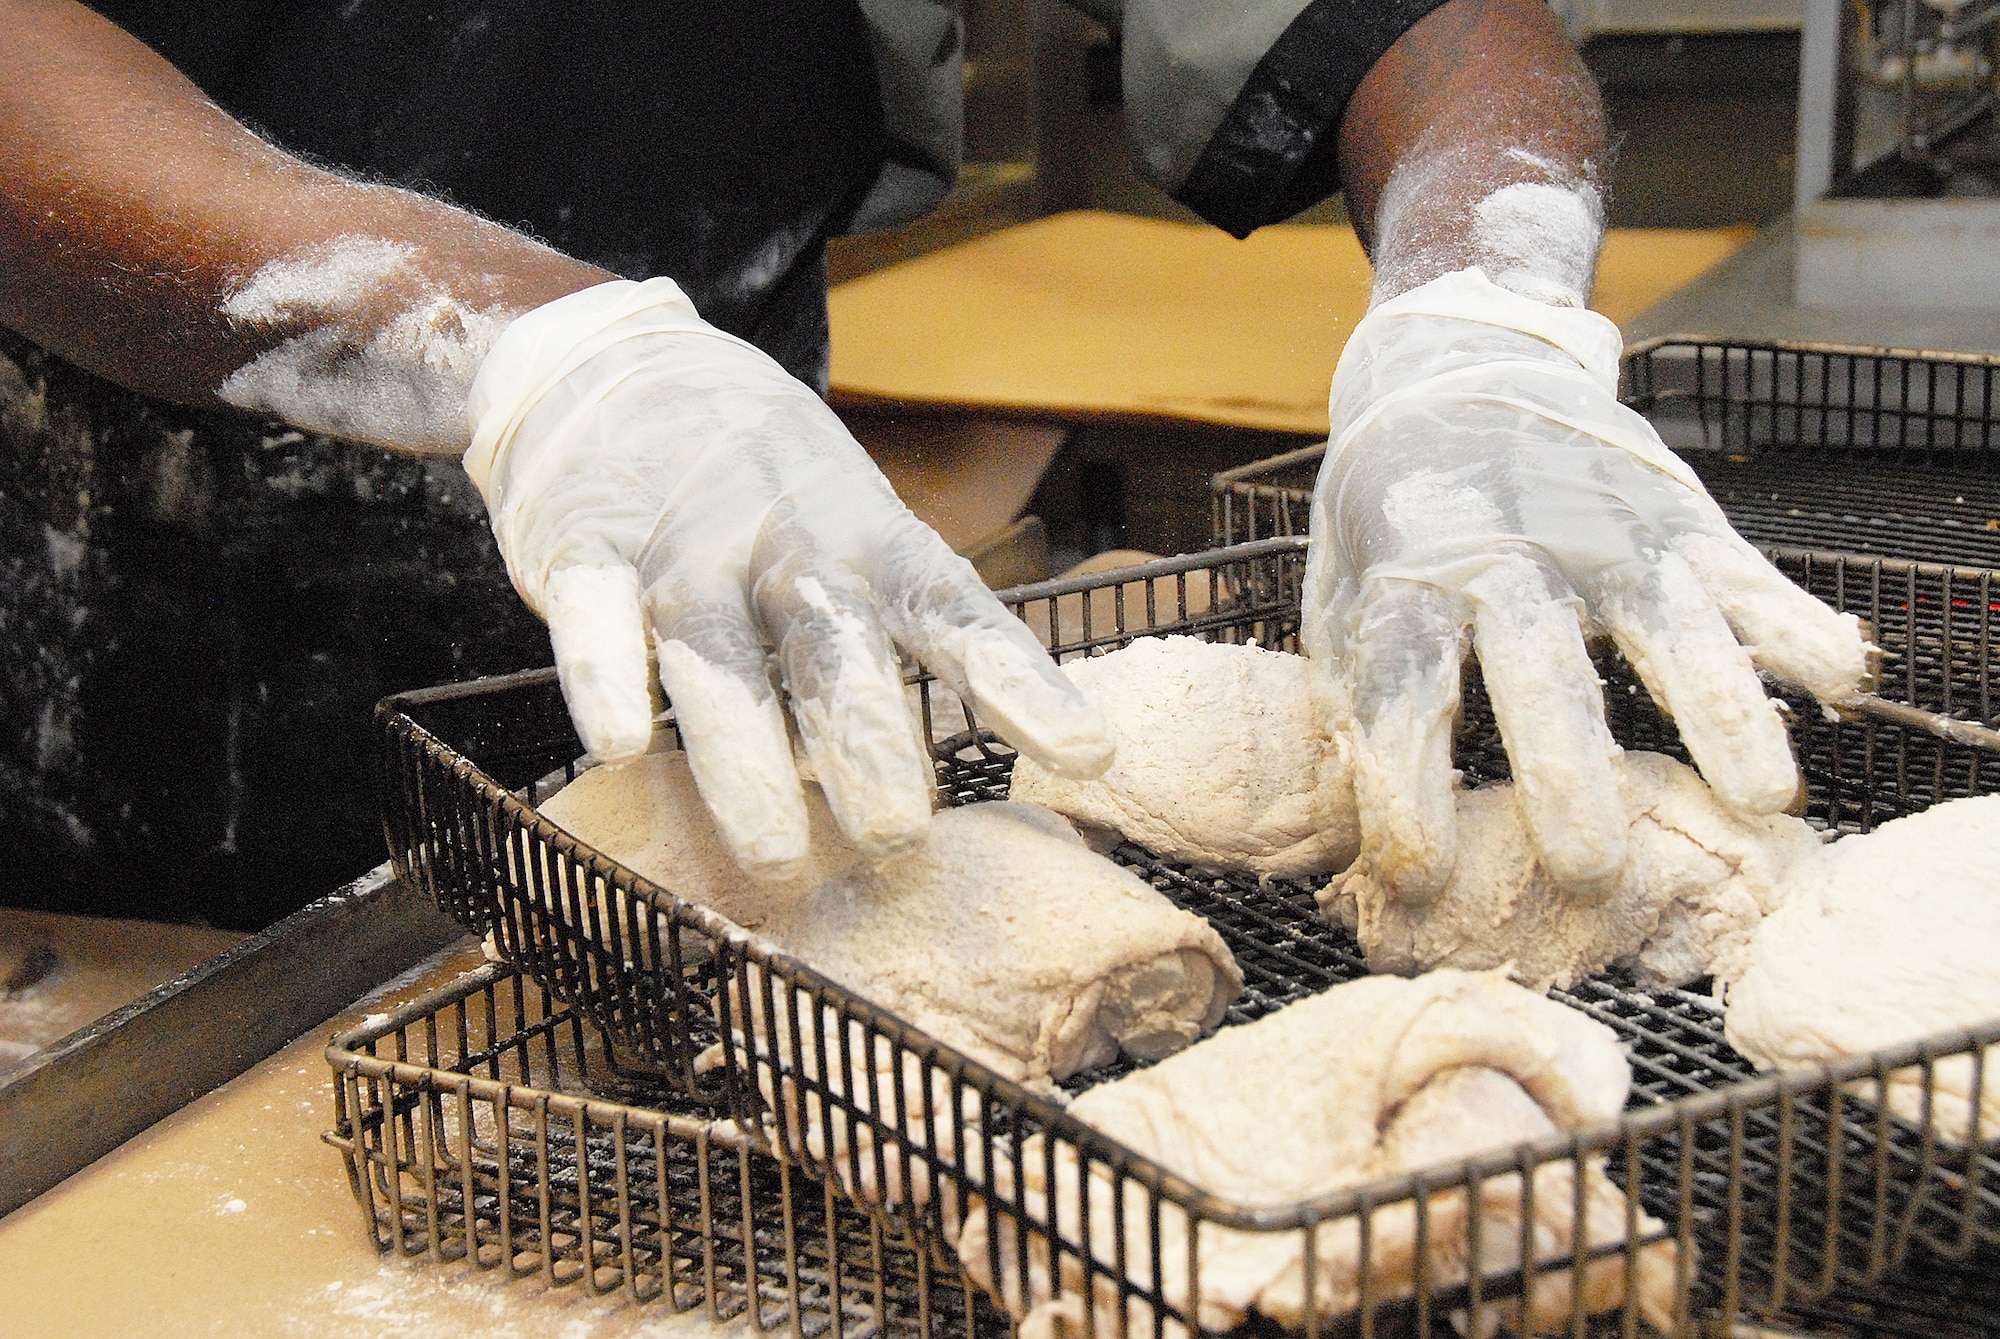 Anthony Nobles places battered chicken in a wire tray to go in the deep fryer.(U. S. Air Force photo/Misuzu Allen)